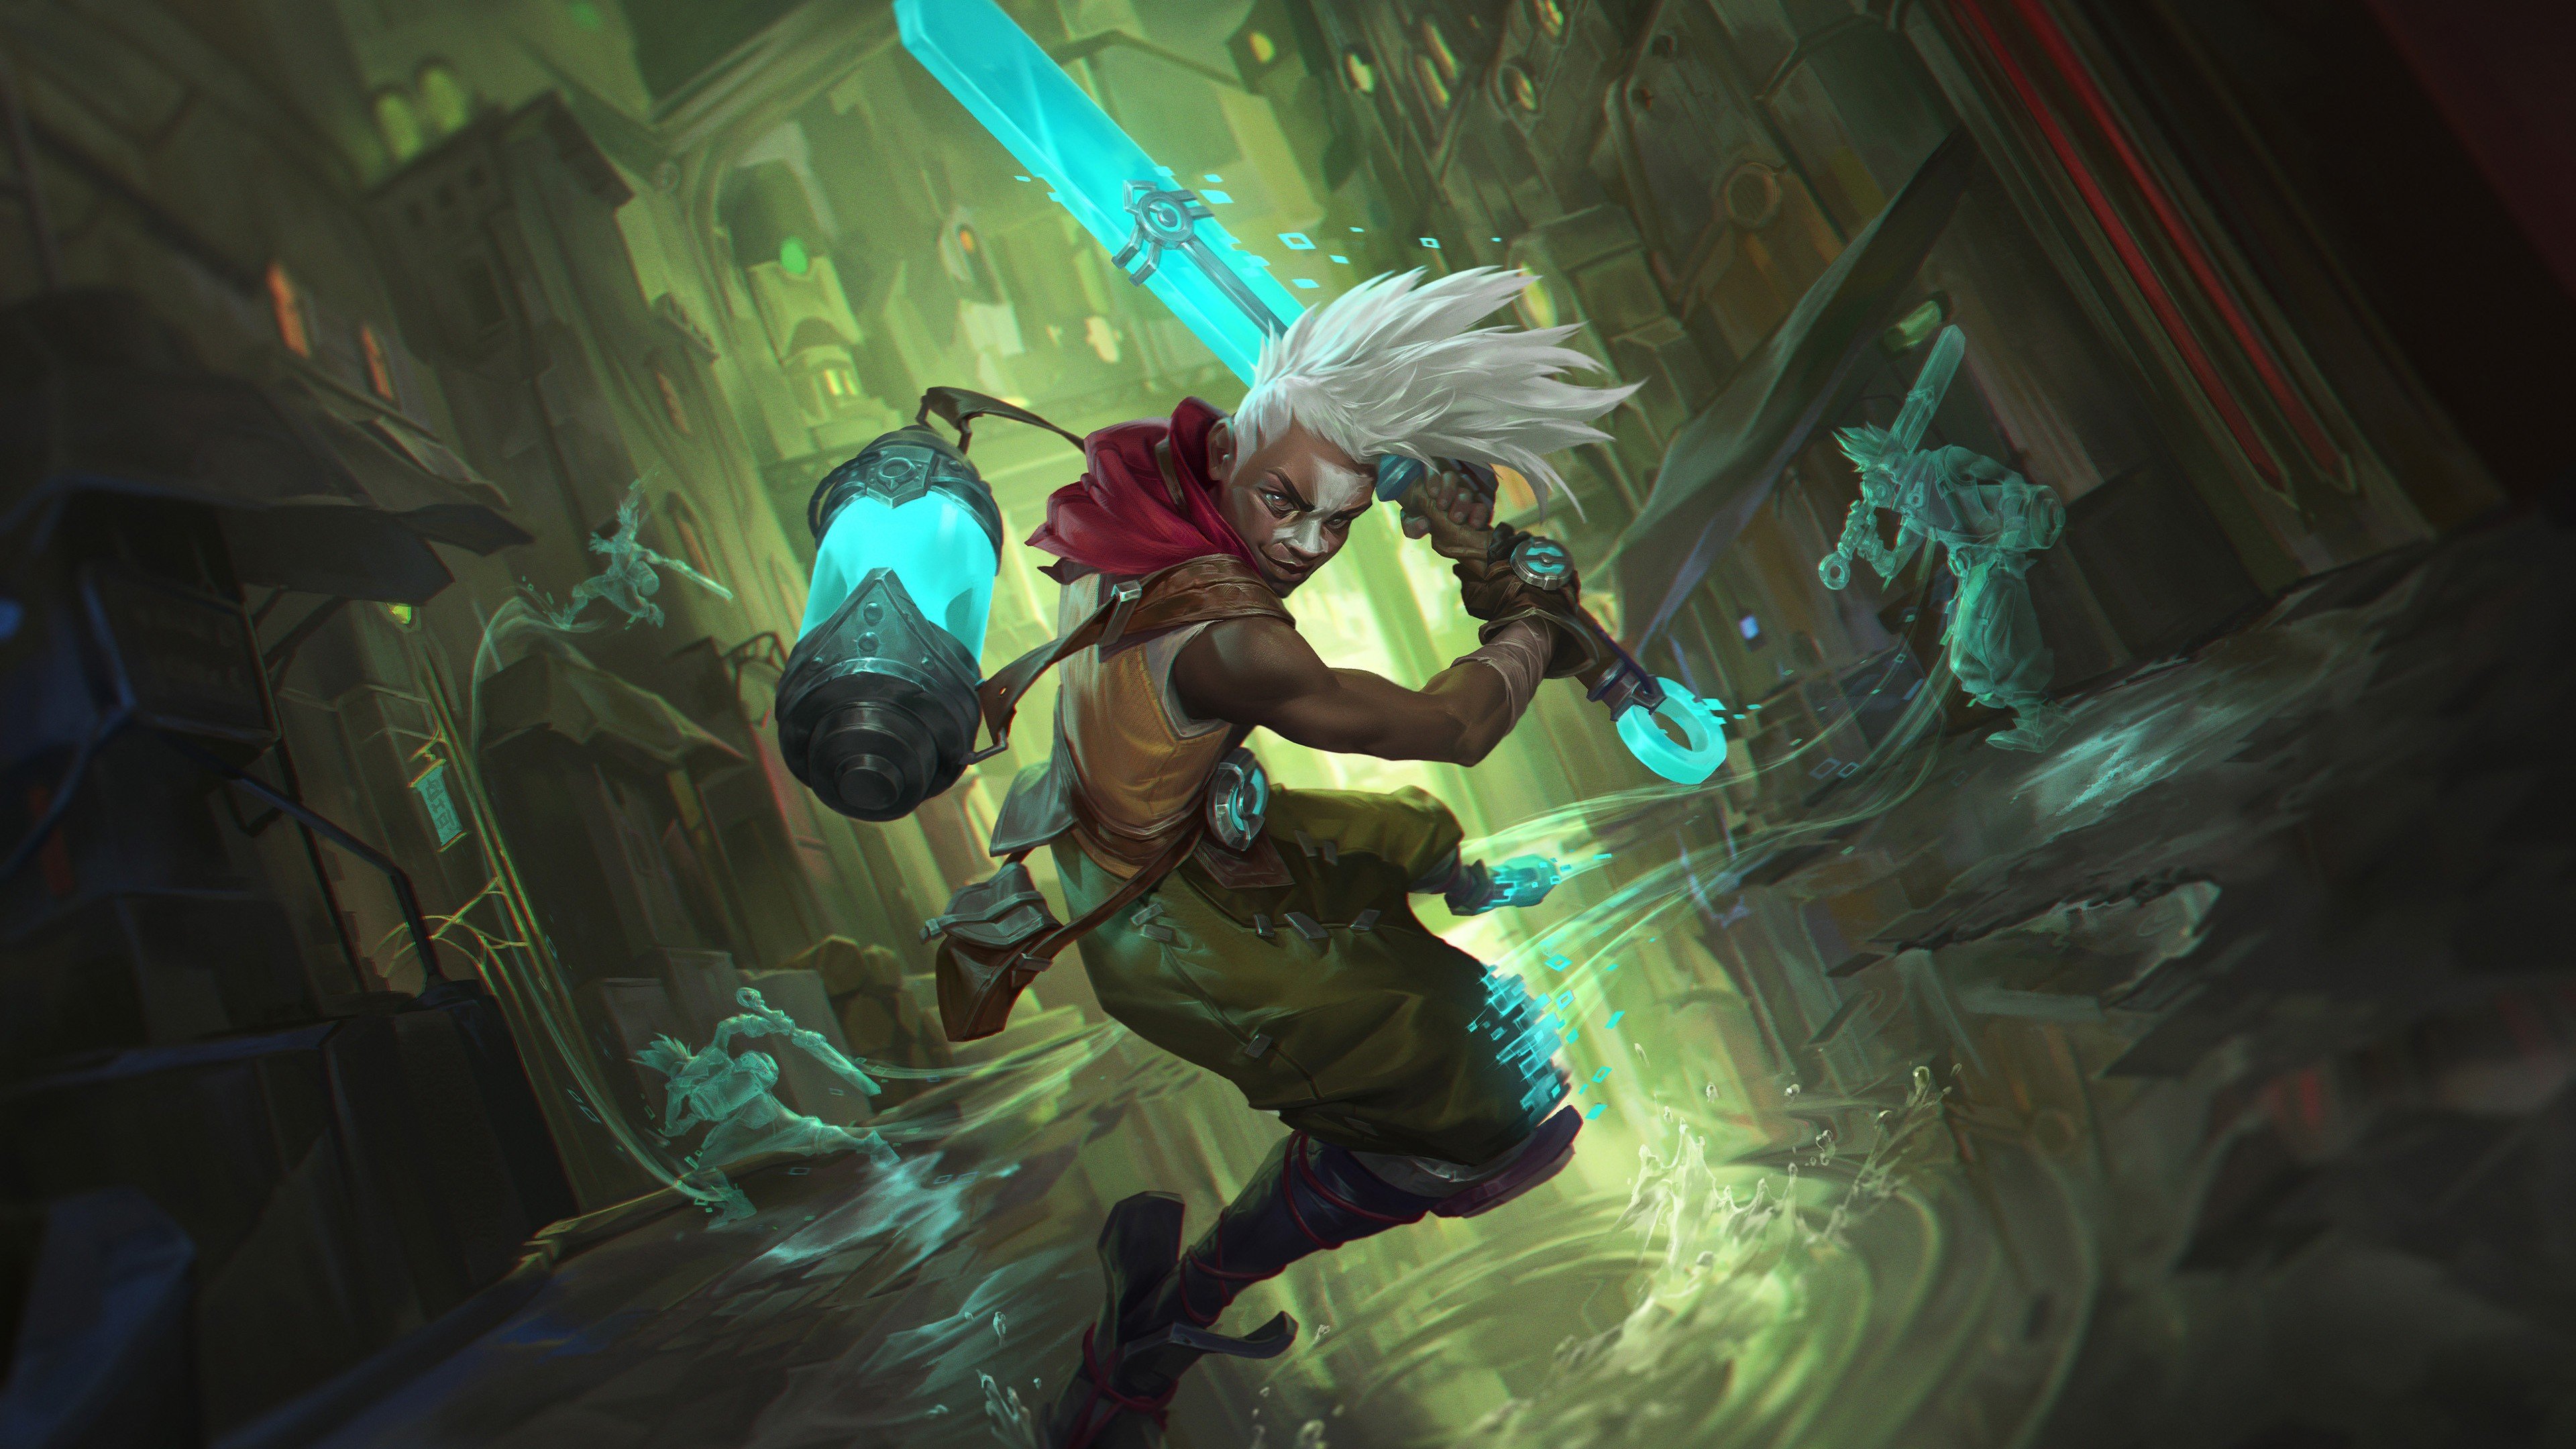 60 Ekko League of Legends HD Wallpapers and Backgrounds